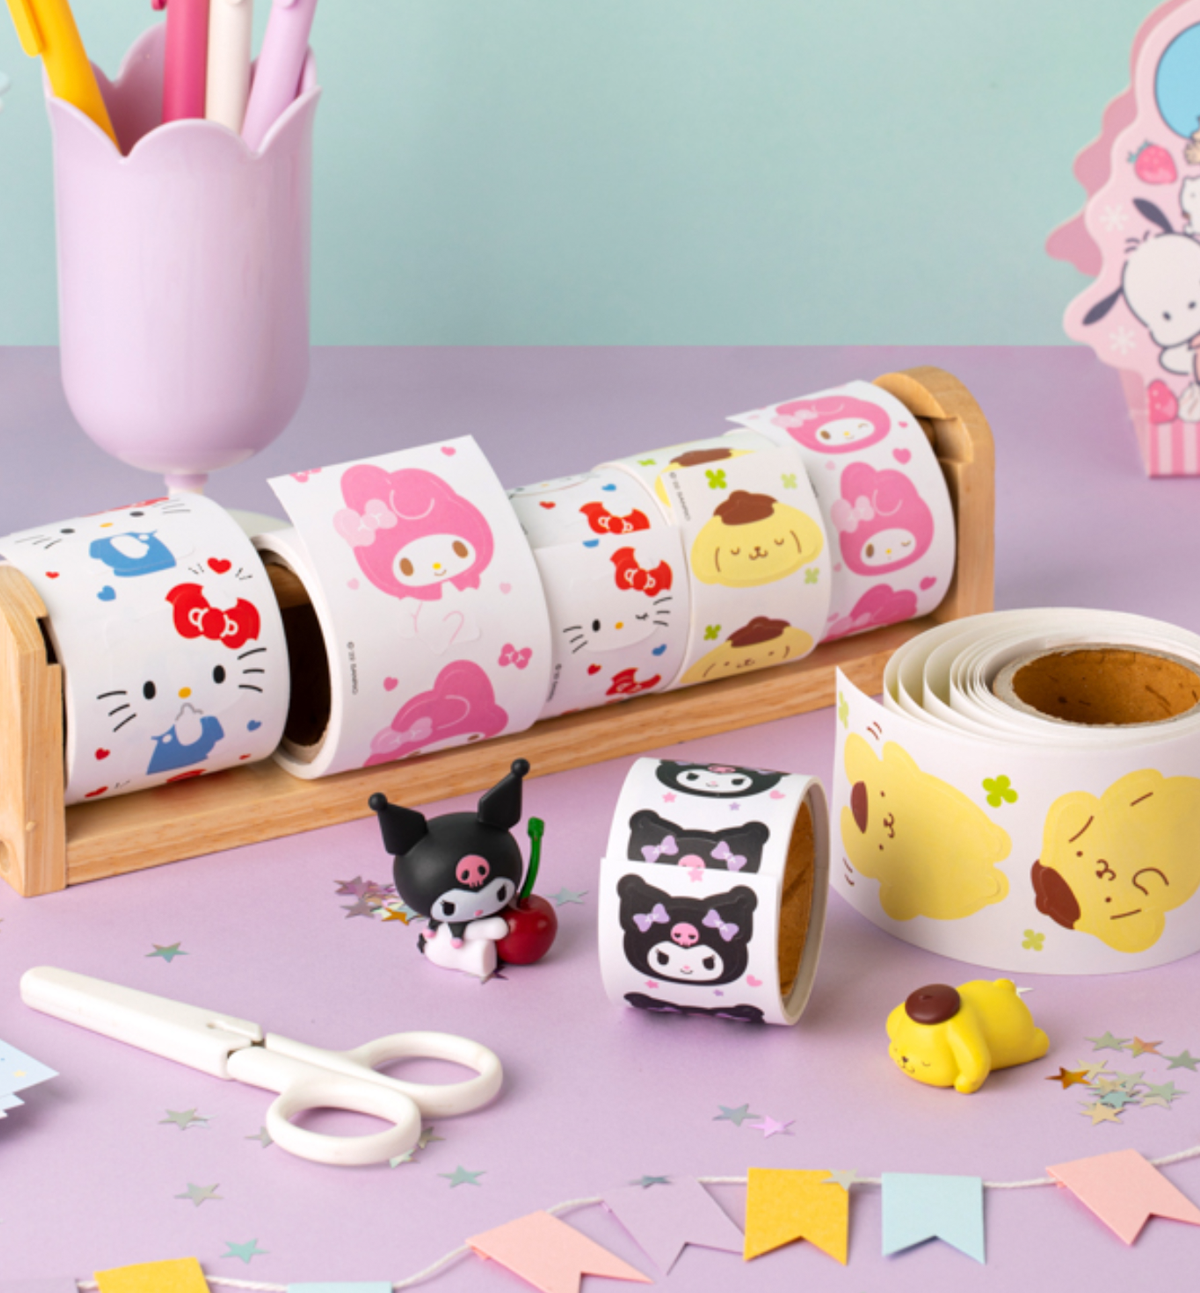 Sanrio Decorative Masking Tape Stickers for Journal Craft - Good